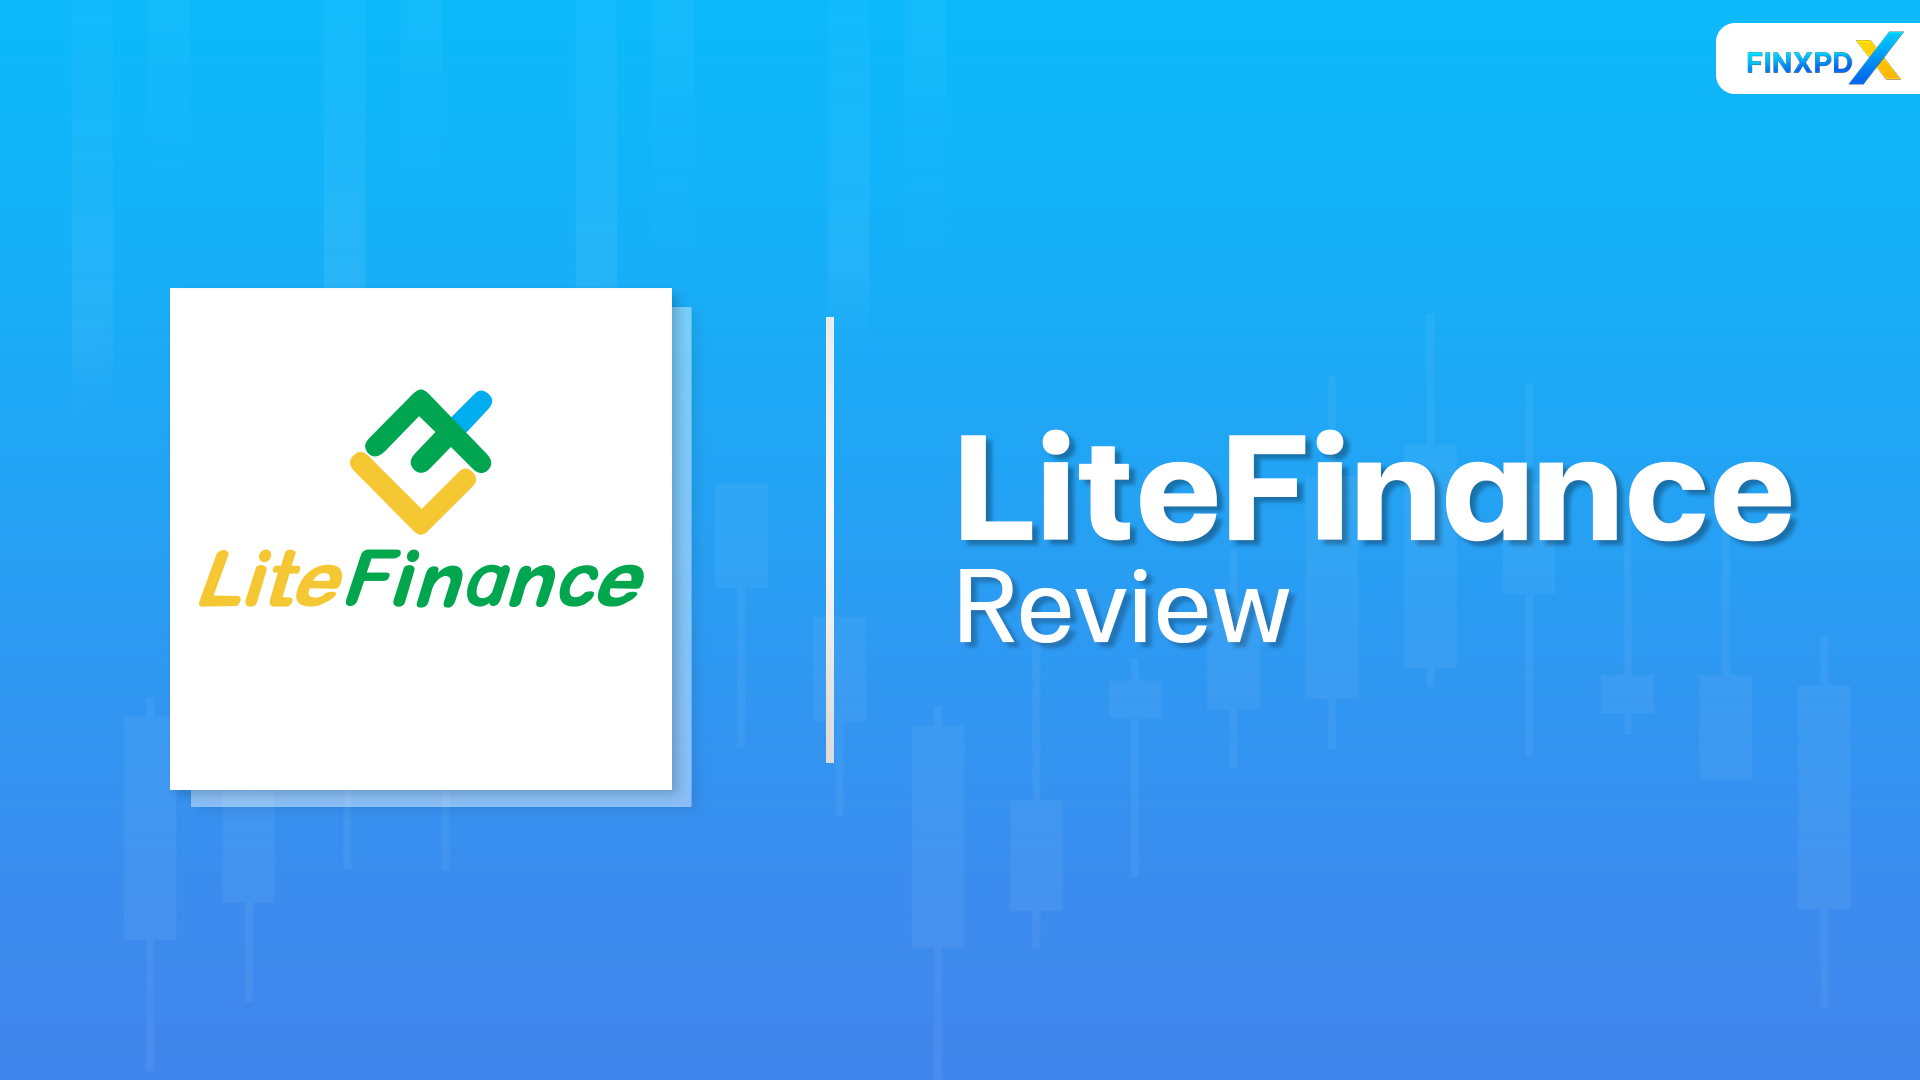 LiteFinance: A New Chapter After LiteForex's Rebranding